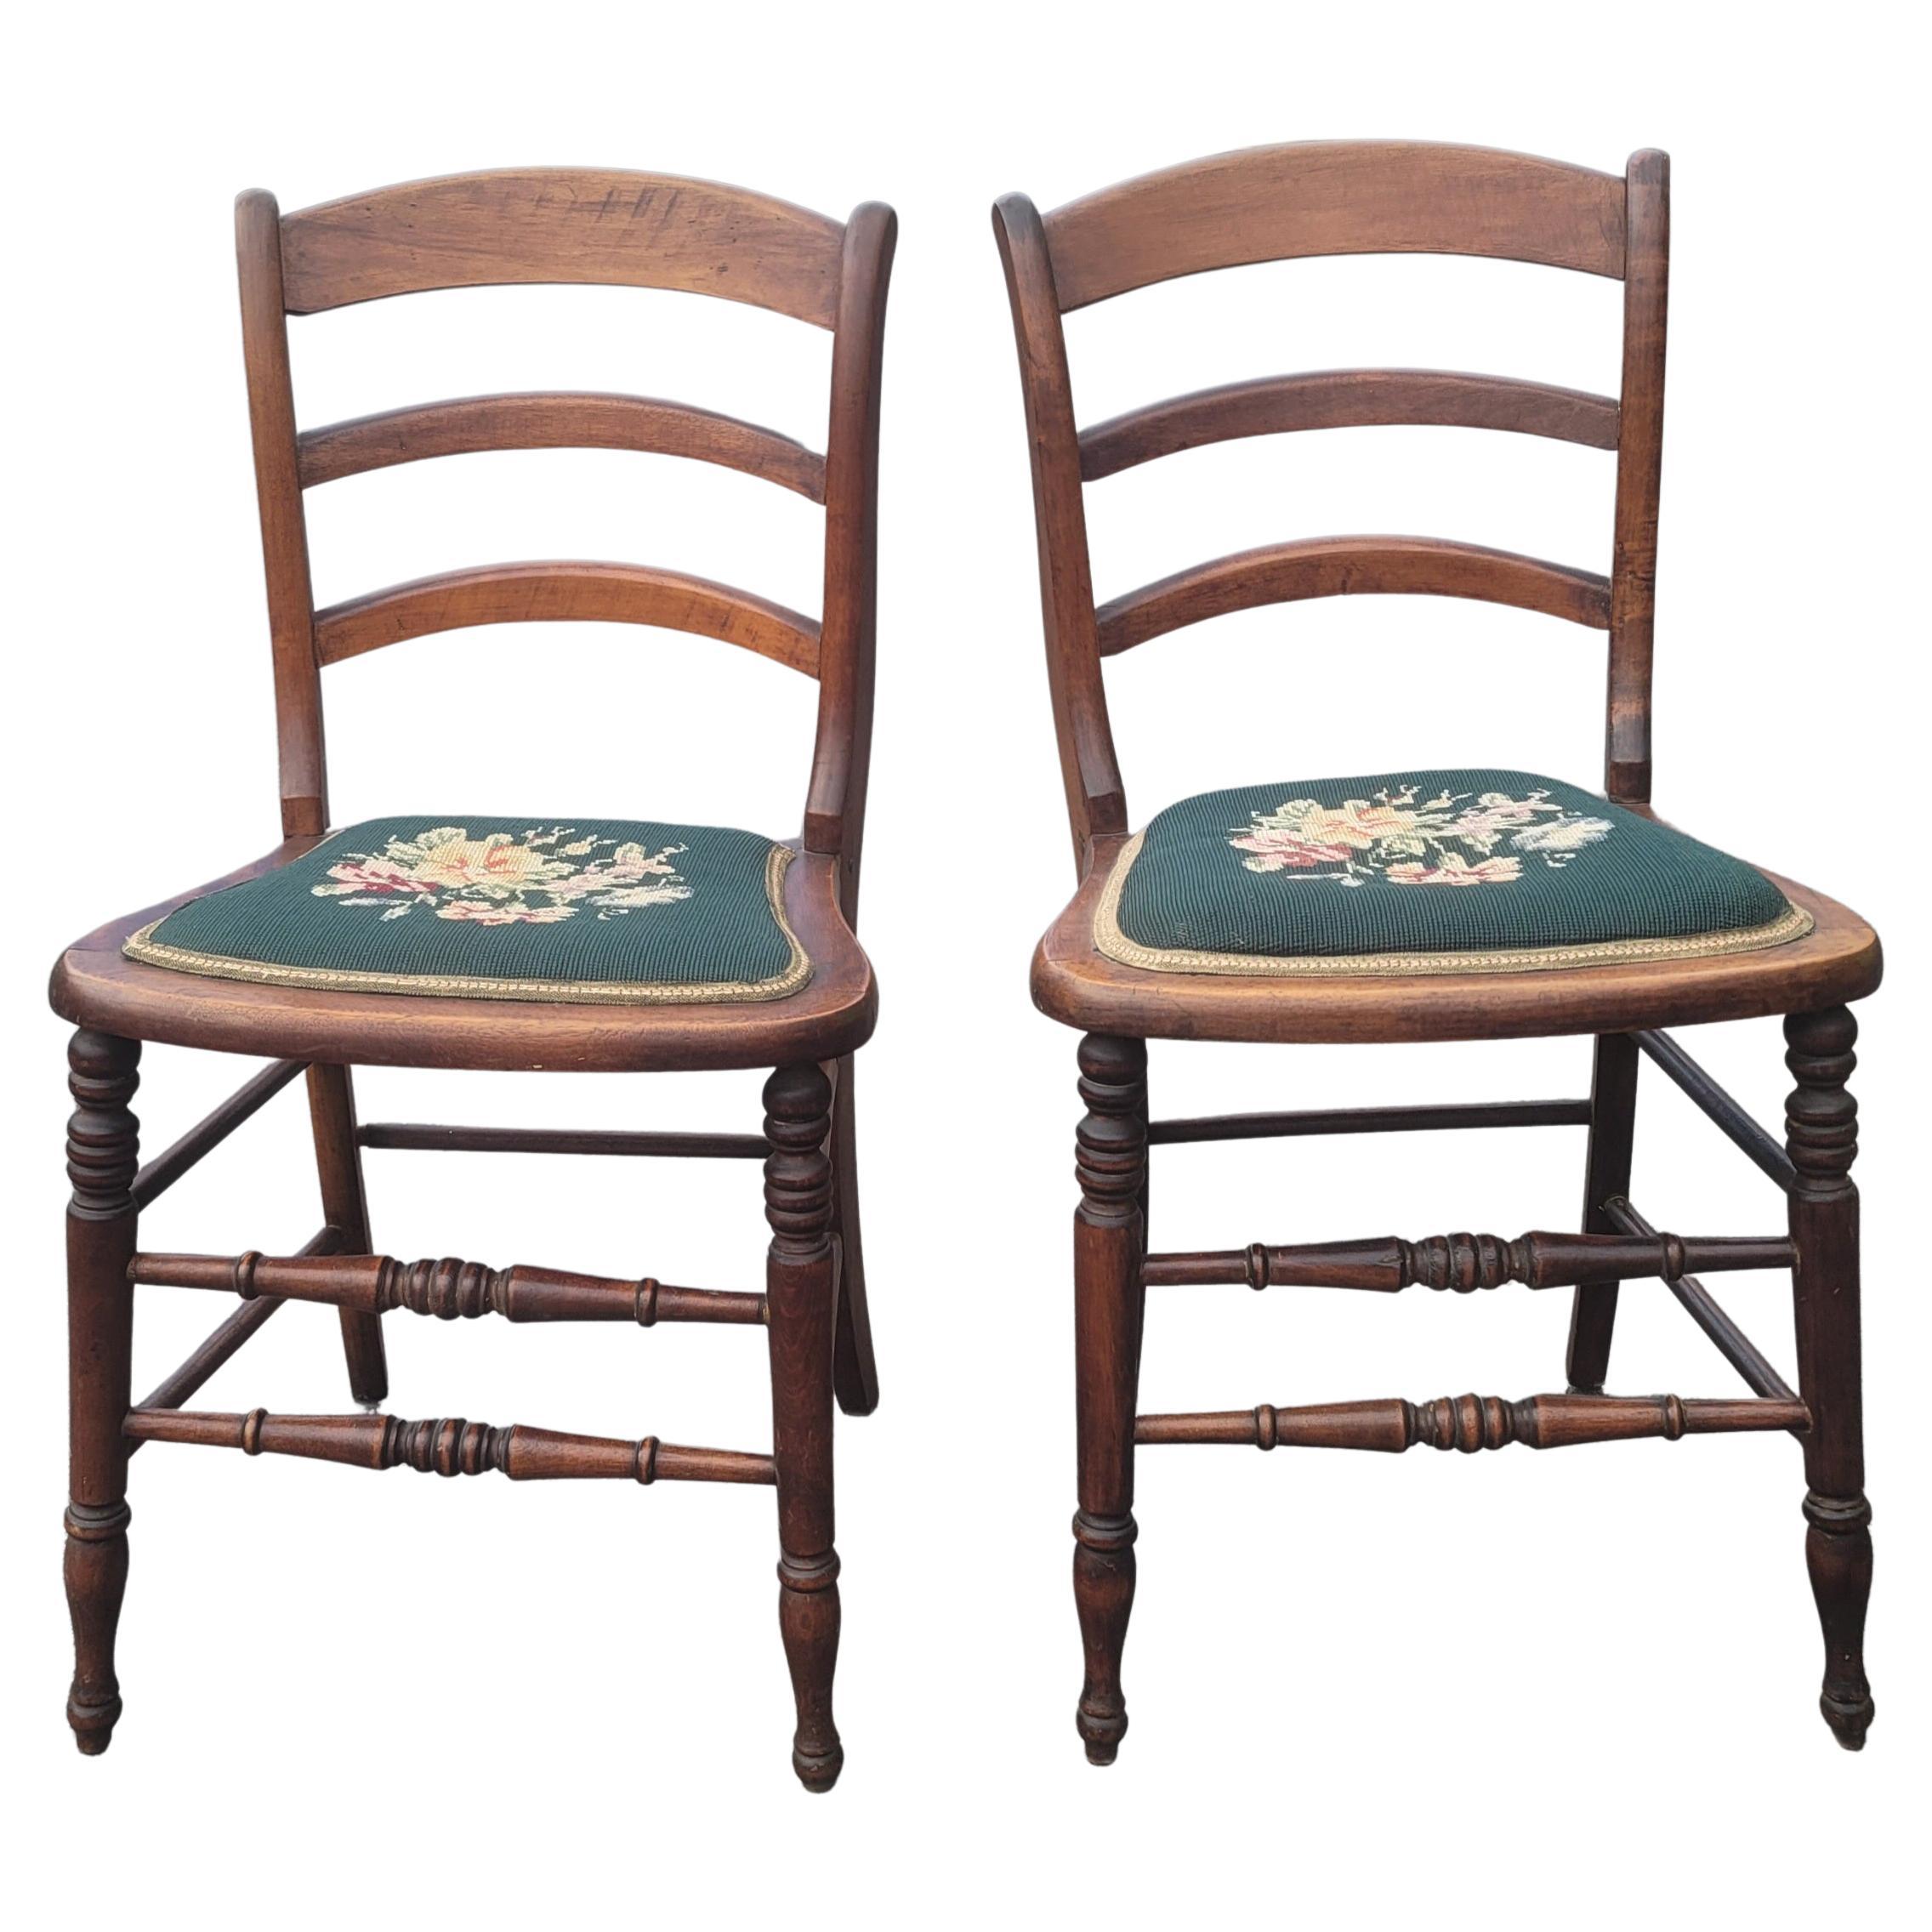 Early 20th Century Victorian Ladder Back Walnut and Needlepoint Seat Side Chairs For Sale